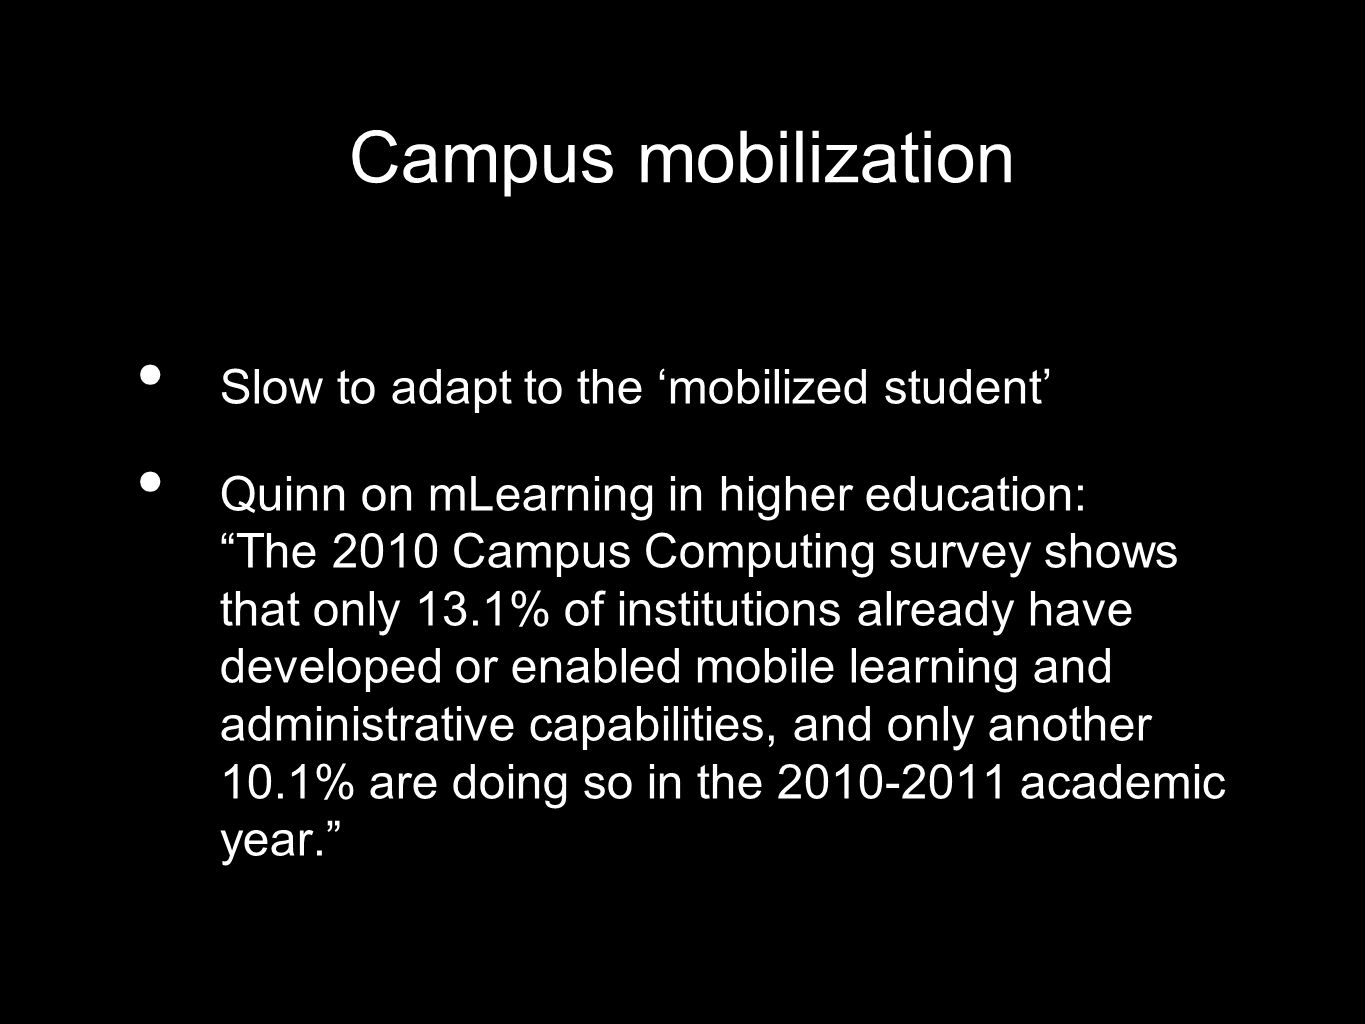 Campus mobilization Slow to adapt to the mobilized student Quinn on mLearning in higher education: The 2010 Campus Computing survey shows that only 13.1% of institutions already have developed or enabled mobile learning and administrative capabilities, and only another 10.1% are doing so in the academic year.